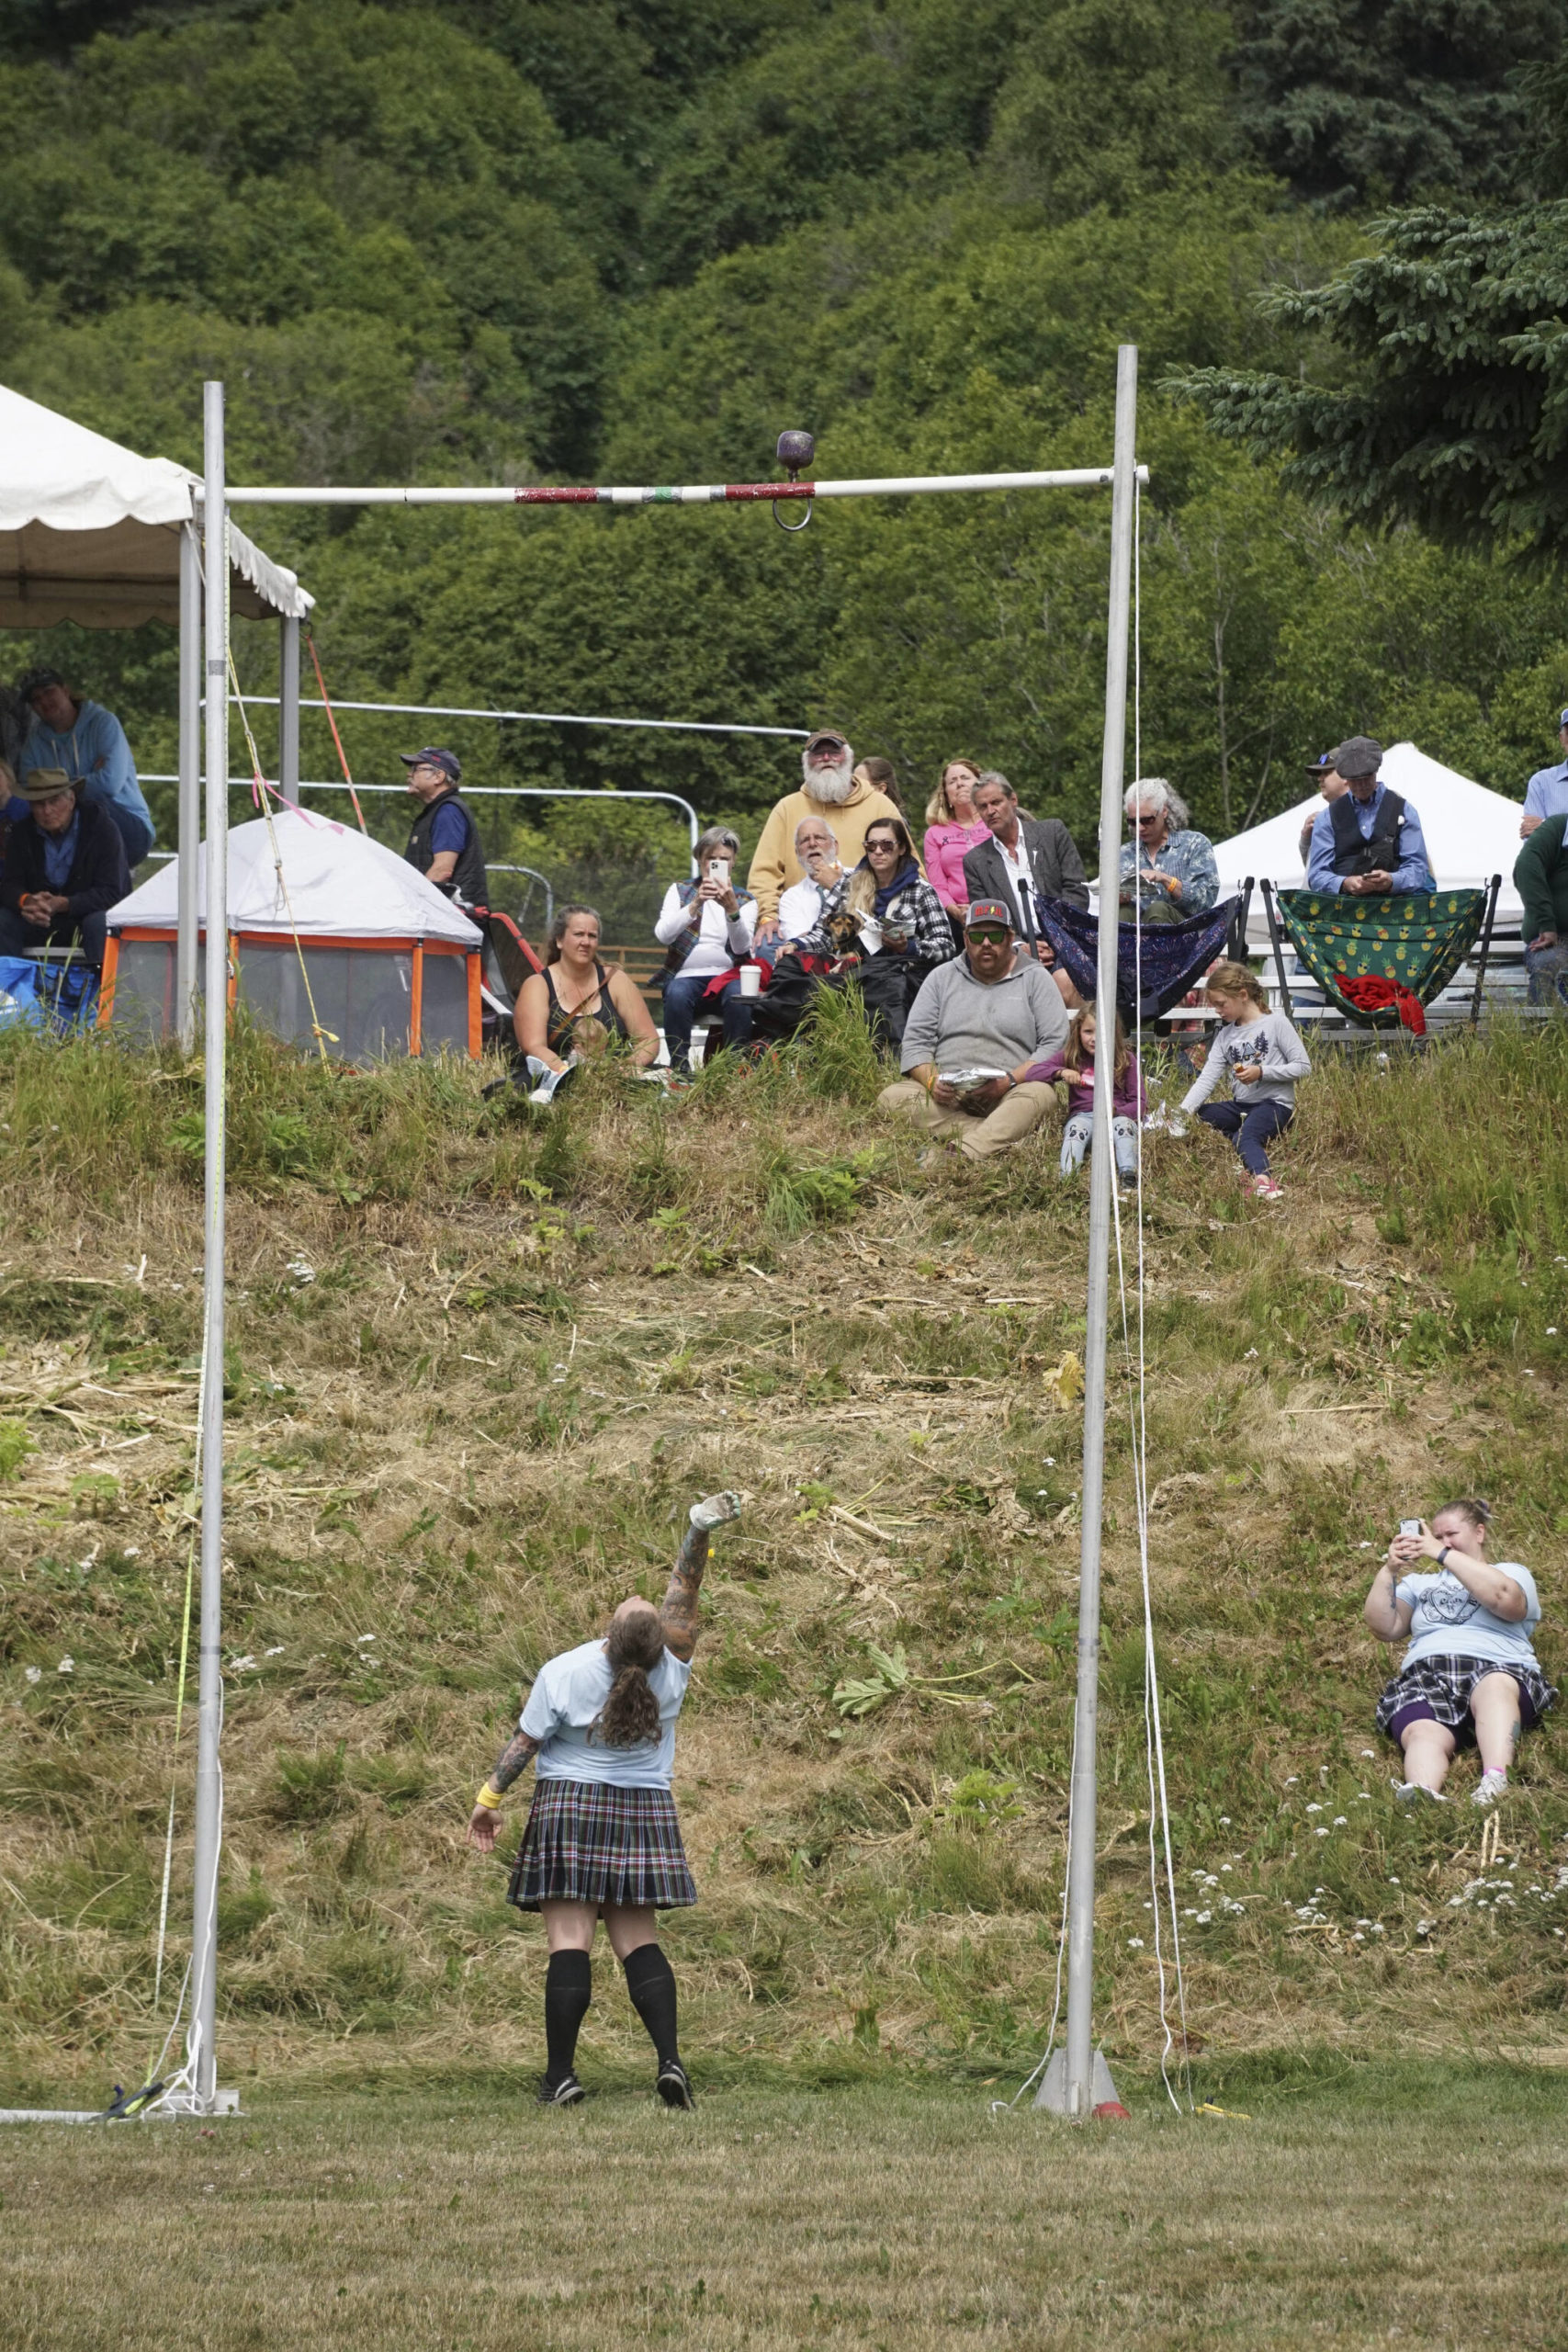 Morgan Ashcraft sets the state and Homer record of 17 feet in the women’s weight-for-height event at the Kachemak Bay Highland Games on Saturday, July 2, 2022, at Karen Hornaday Park in Homer, Alaska. (Photo by Michael Armstrong)